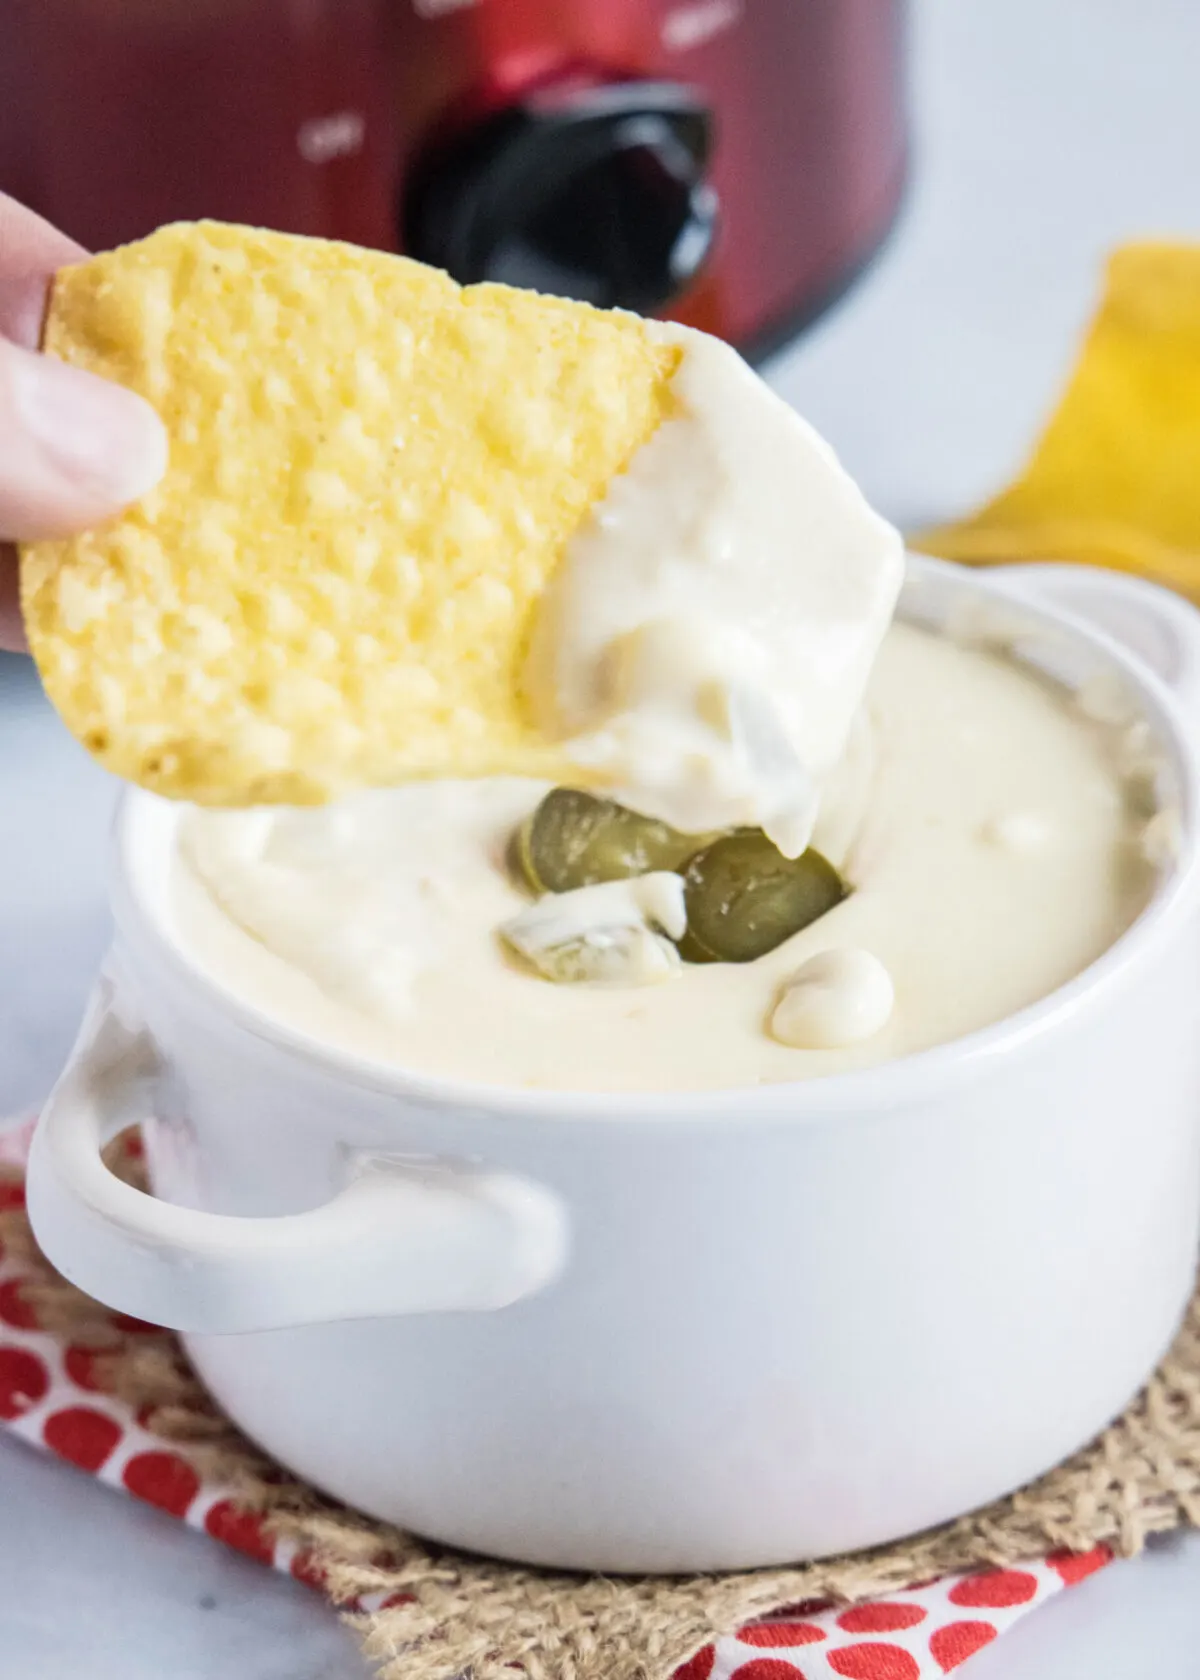 A hand pulling a chip out of a bowl of white queso dip